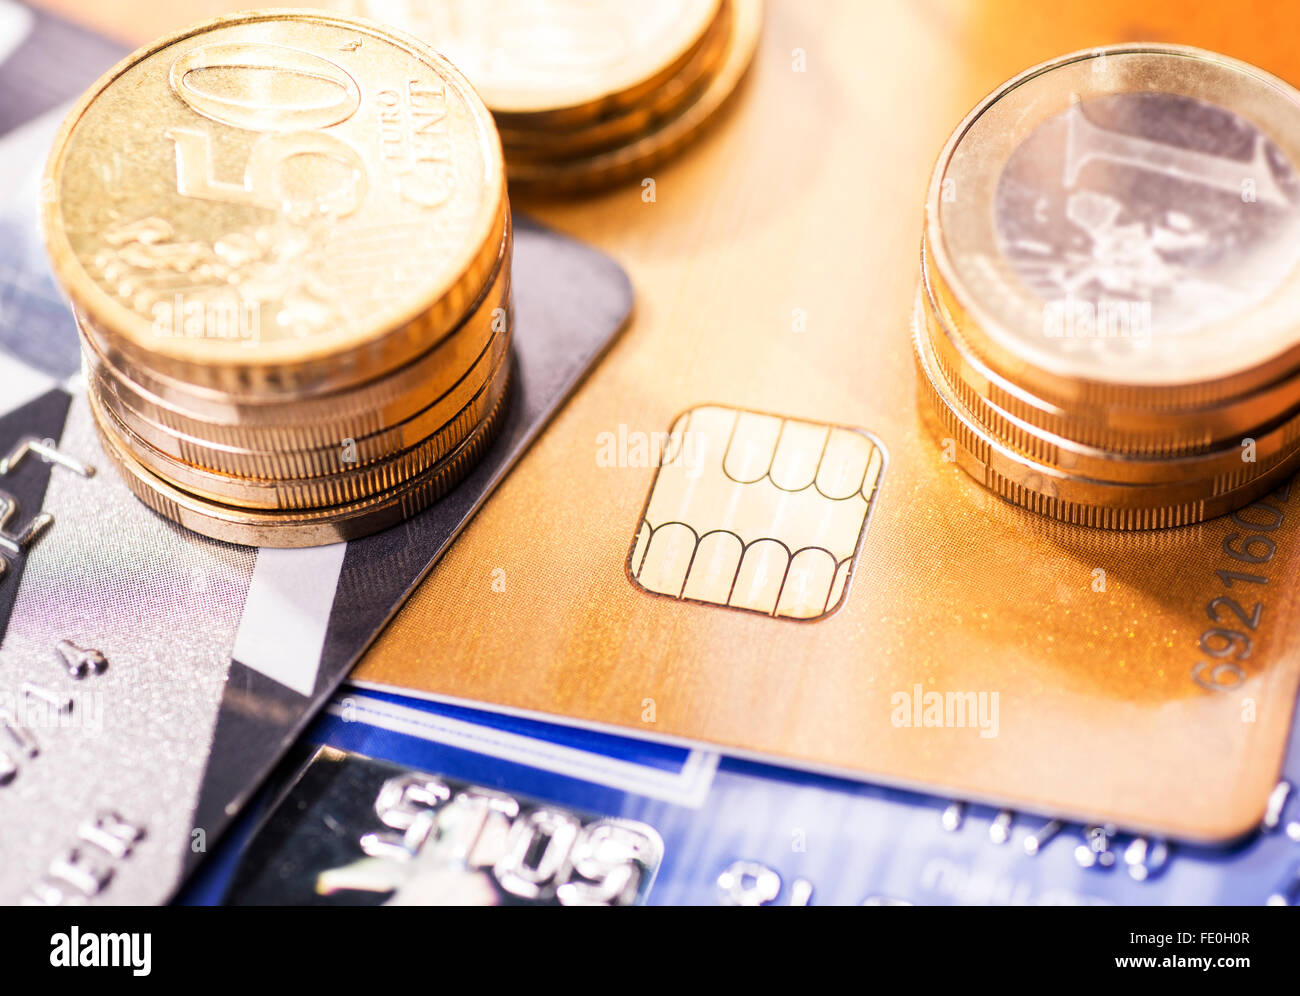 Smart card with chip and coins Stock Photo